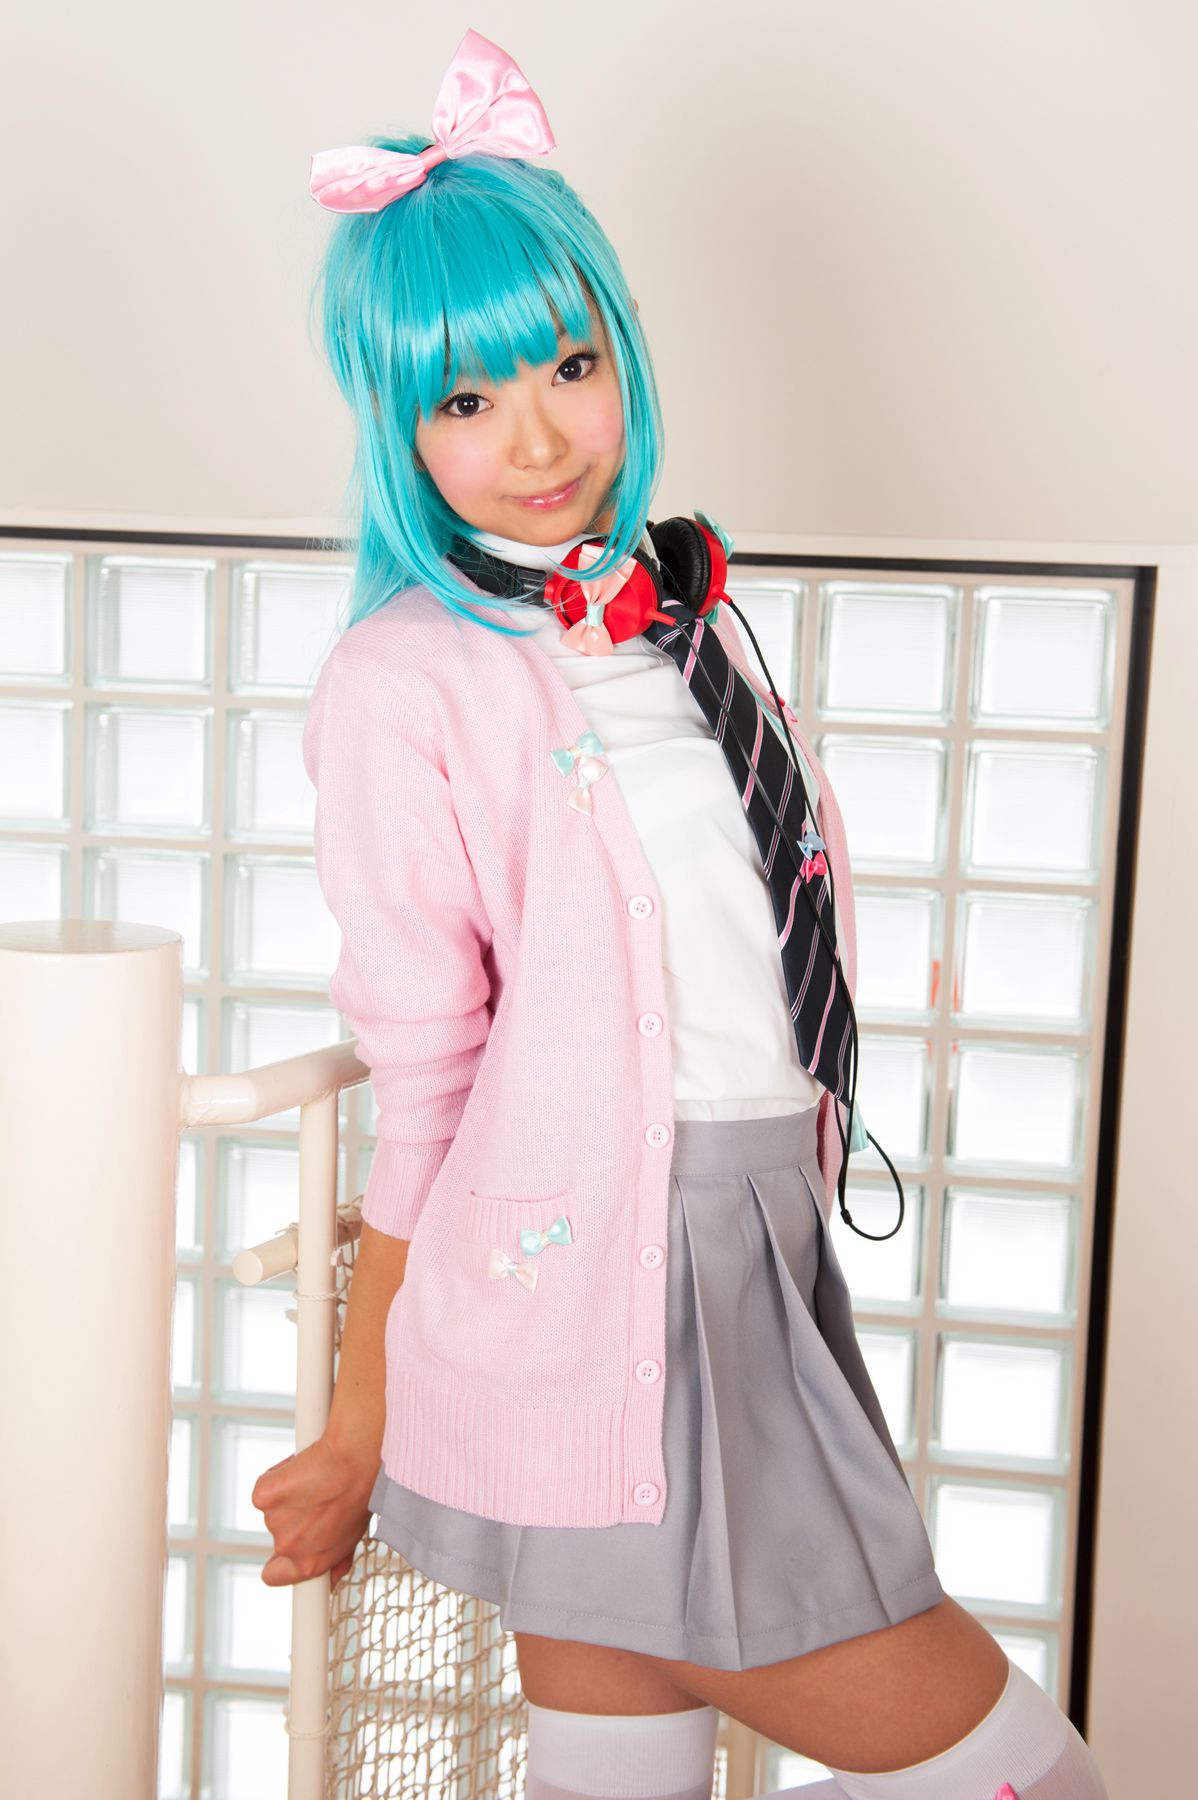 taotuhome[Cosplay] Necoco as Hatsune Miku from Vocaloid 套图第136张